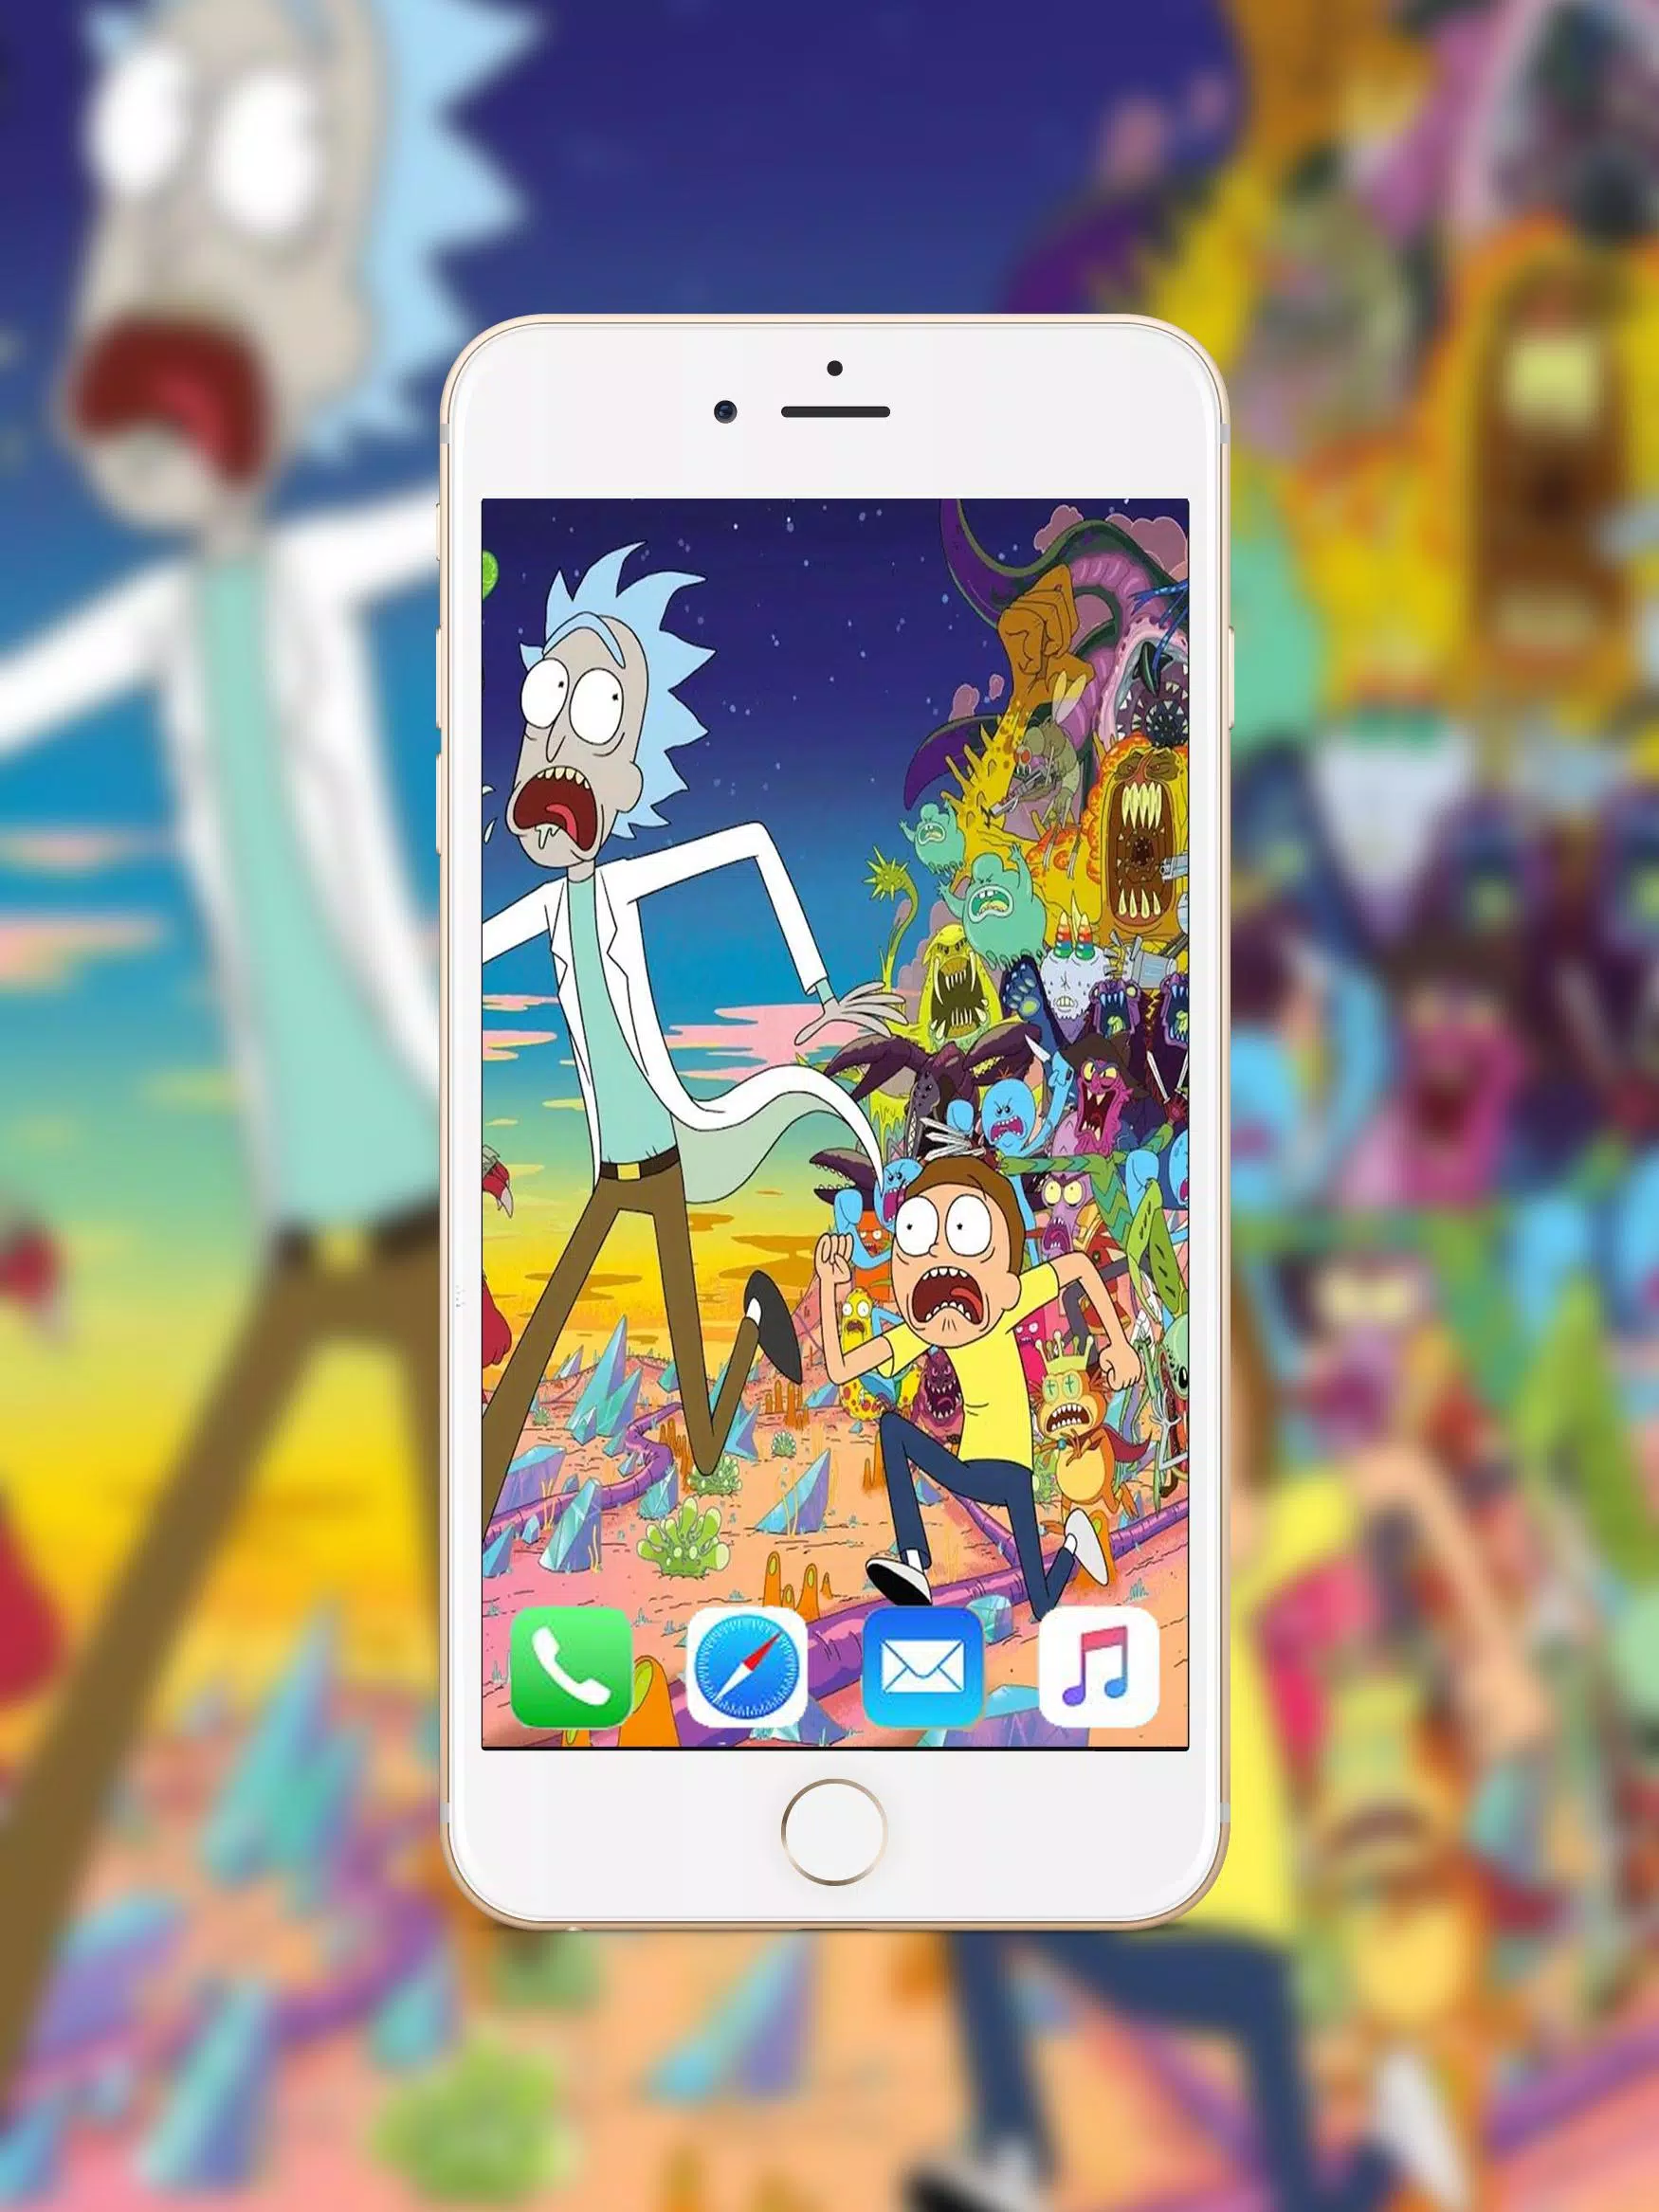 Rick and Morty Wallpaper HD for Android - Download the APK from Uptodown